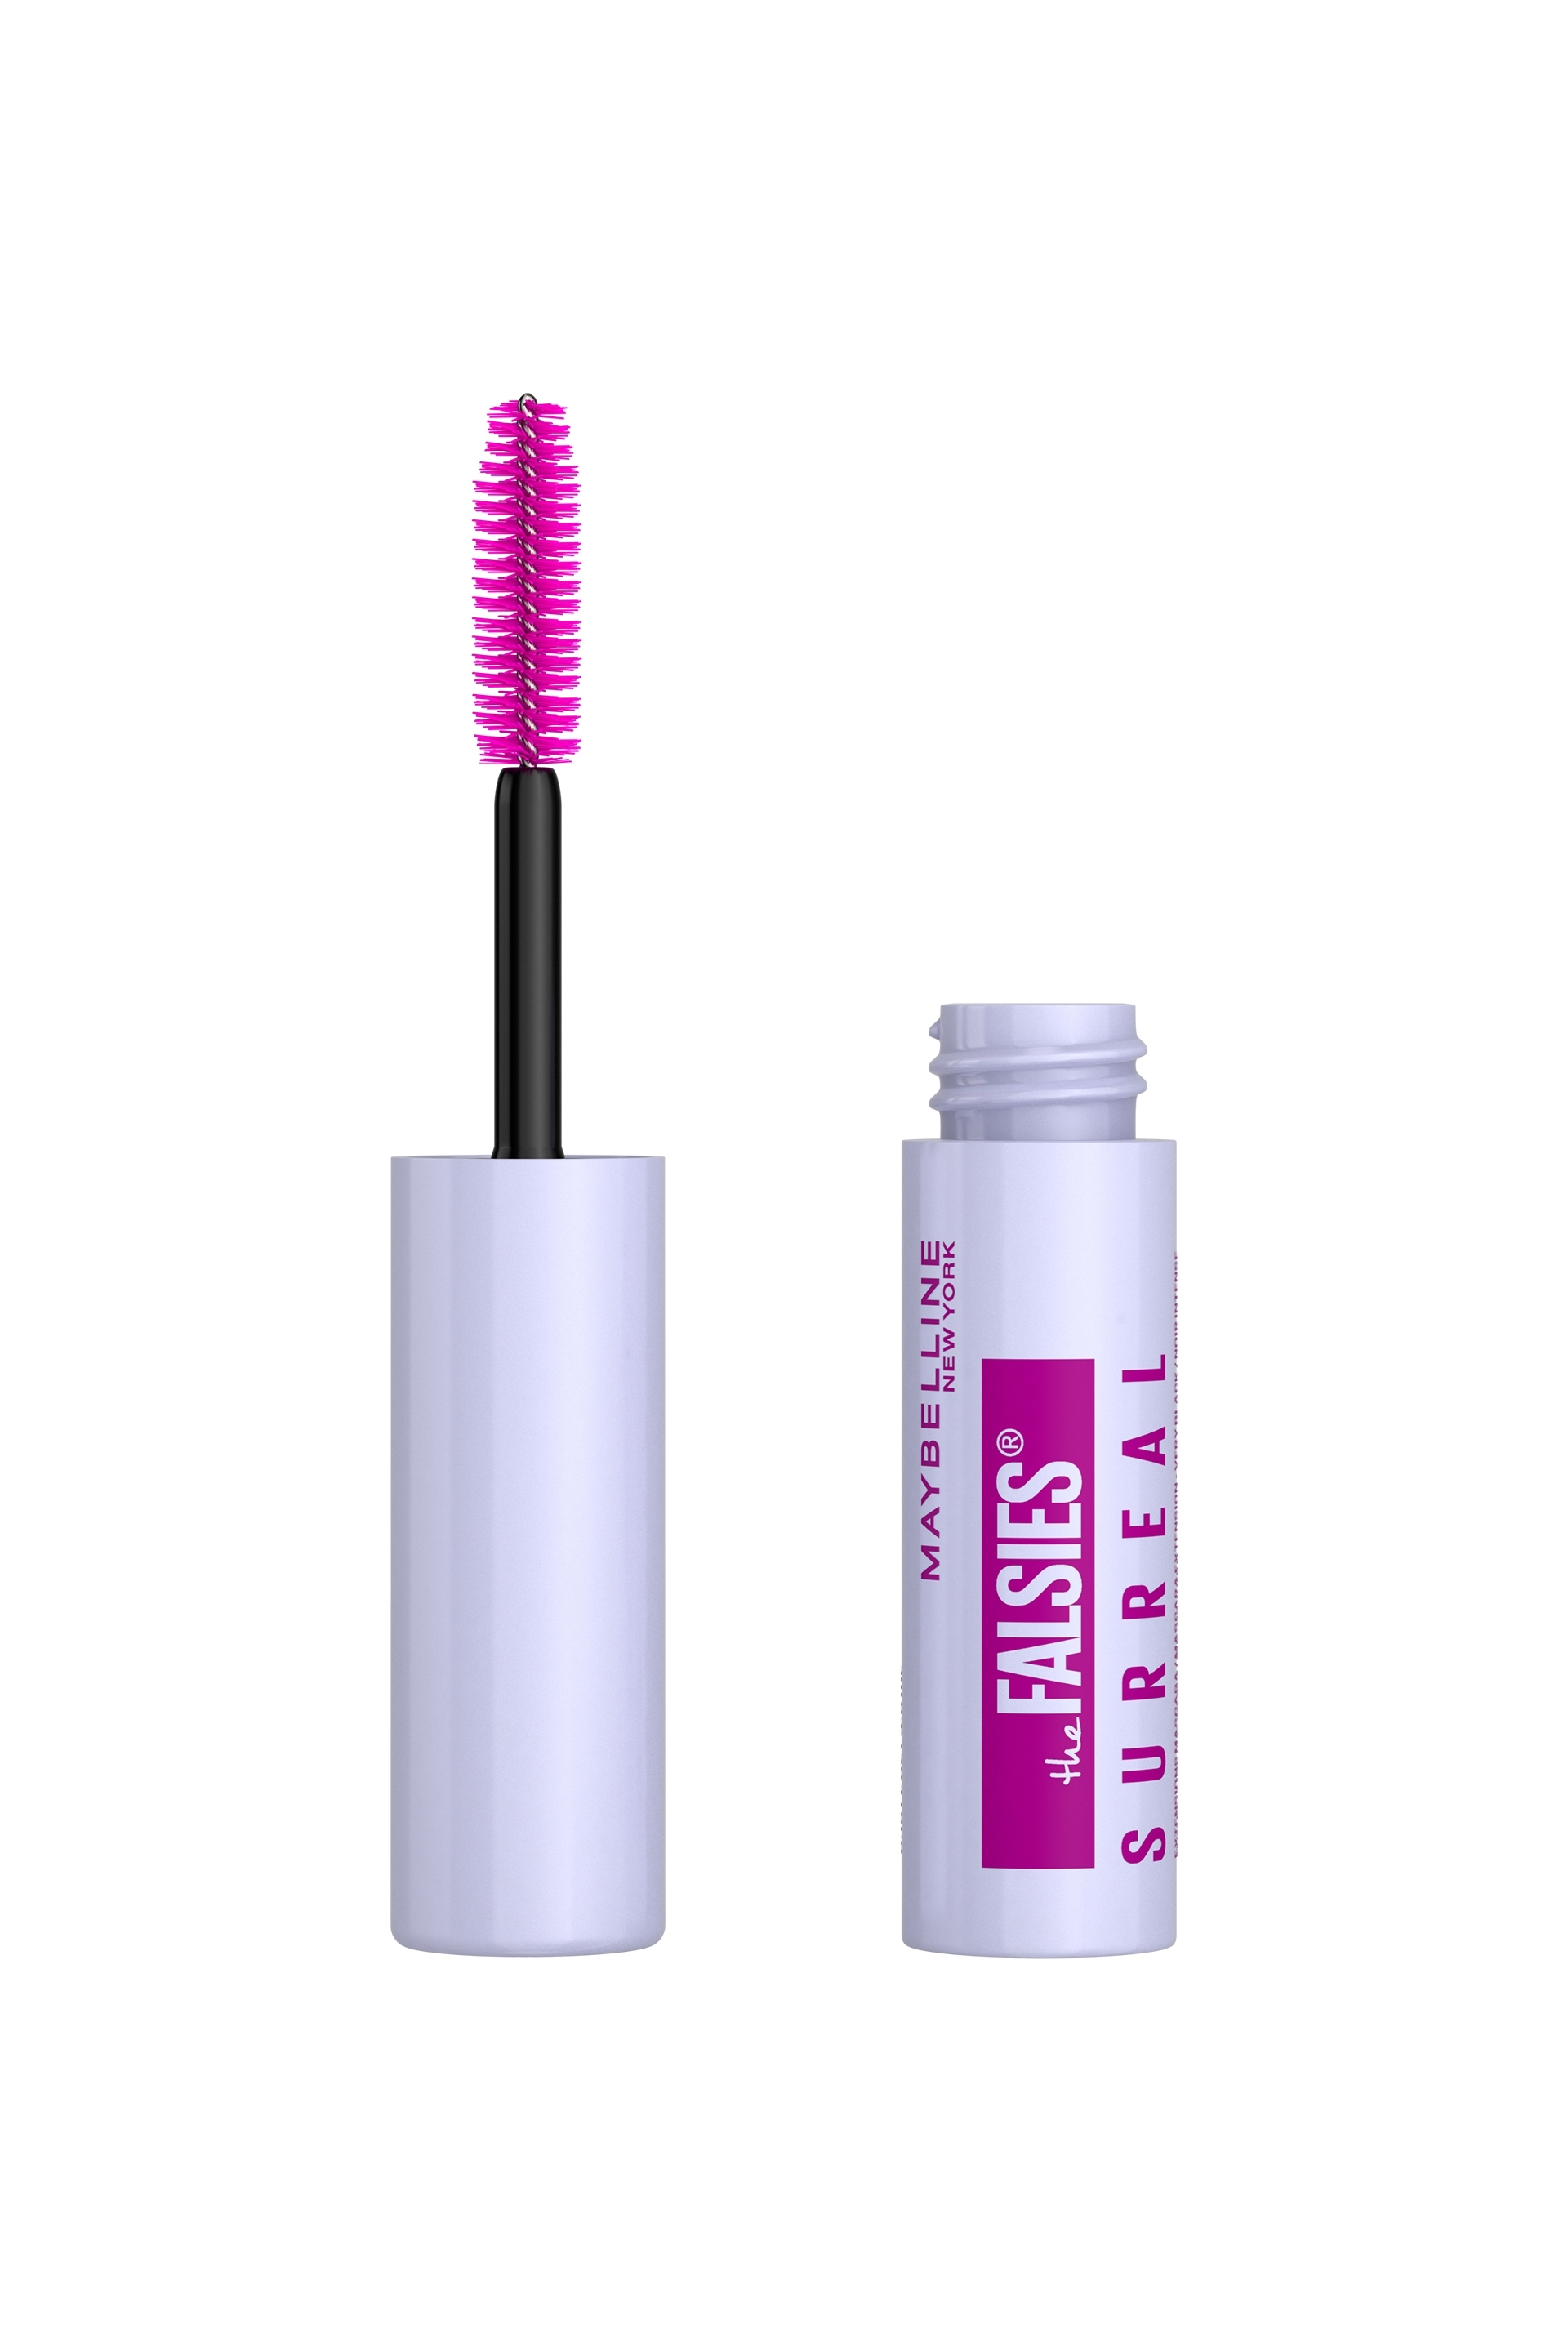 Maybelline NEW Falsies Surreal Extensions Mascara Mini